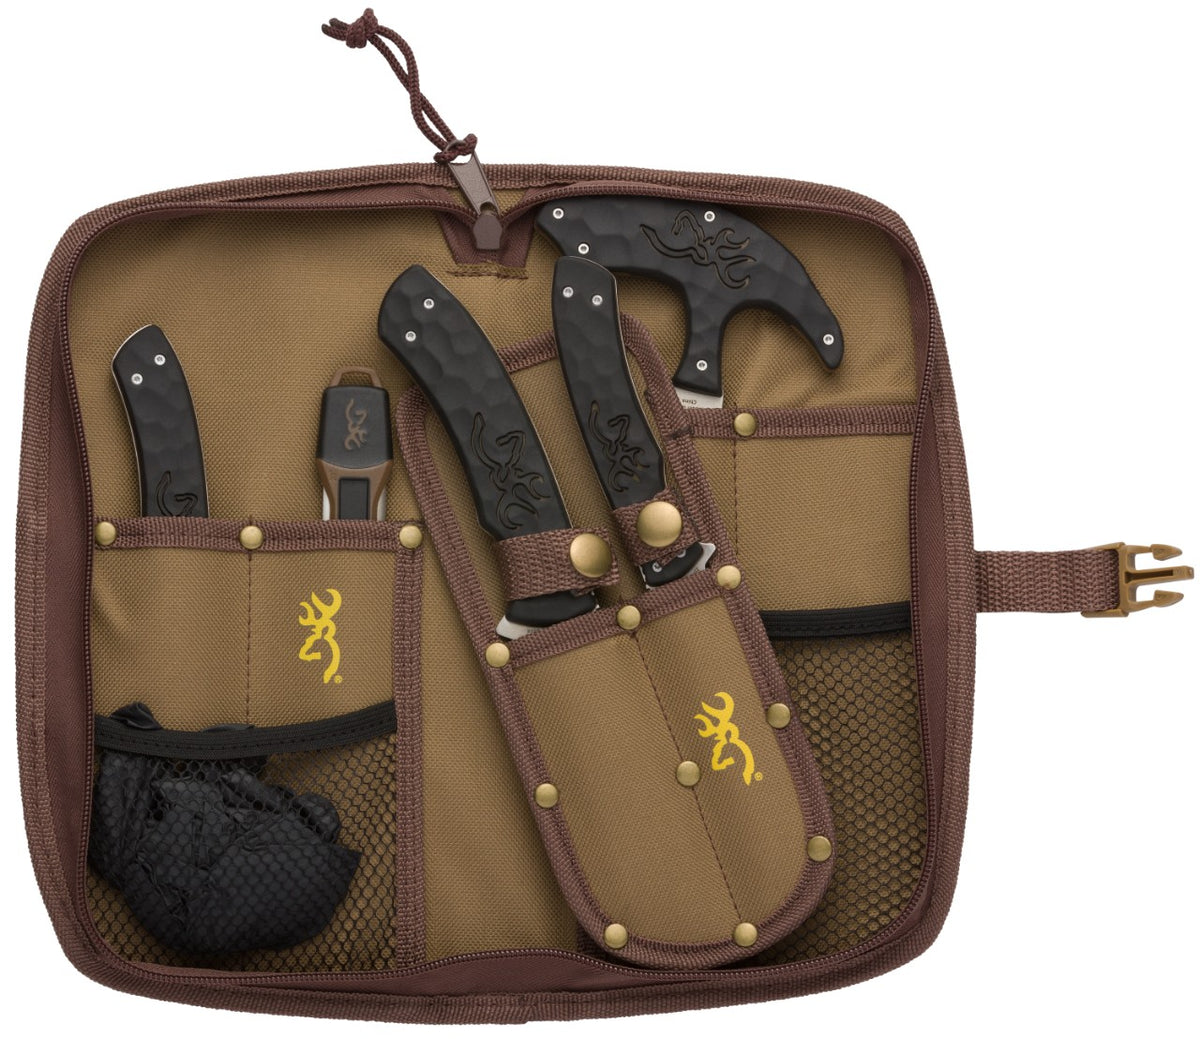 KNIFE, PRIMAL 6PC COMBO BOXED